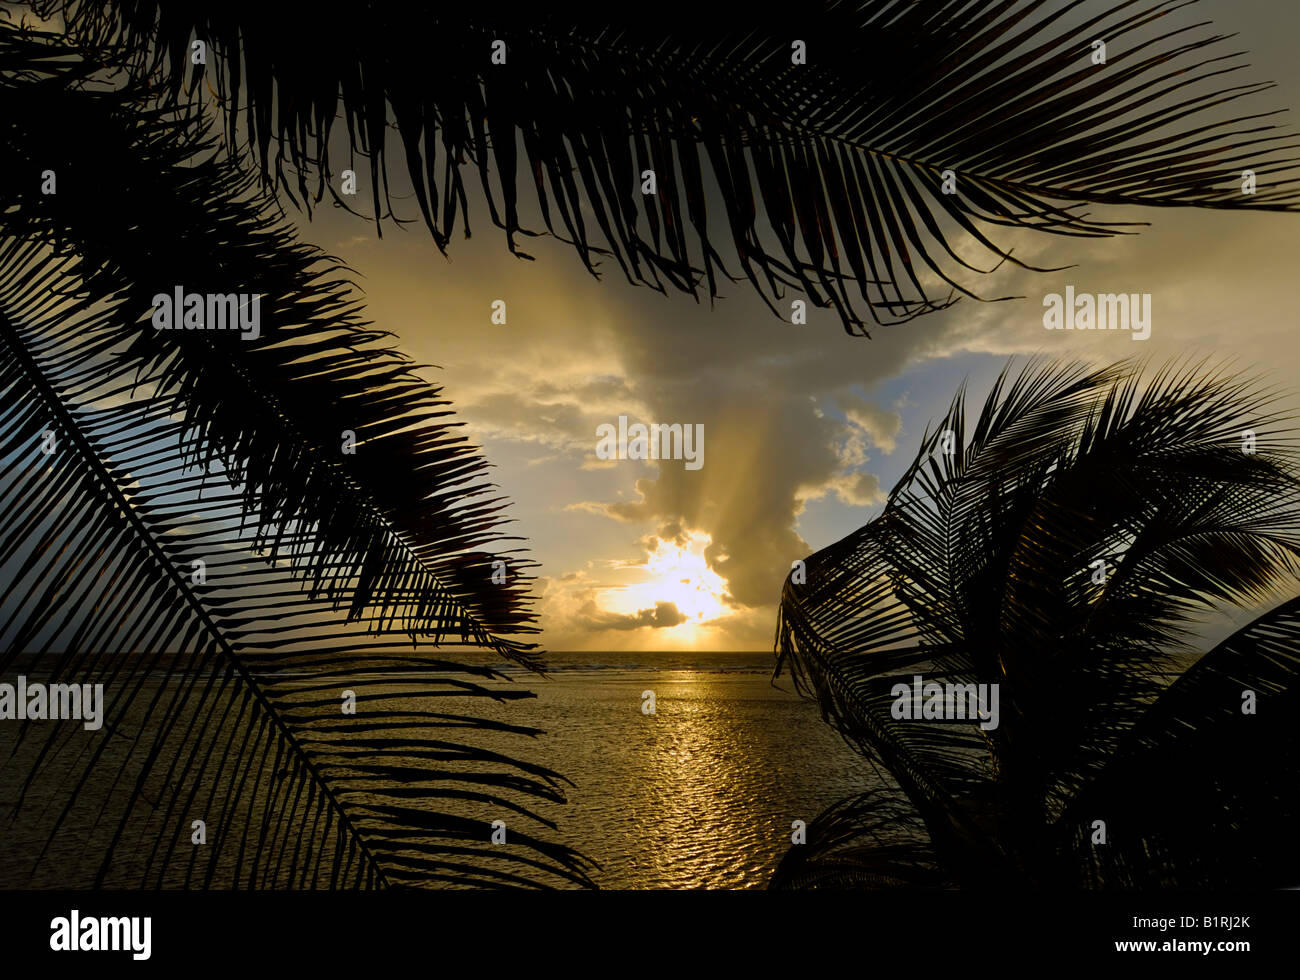 Sunrise seen through palm trees on South Water Caye Island, Belize Barrier Reef, Caribbean, Central America Stock Photo